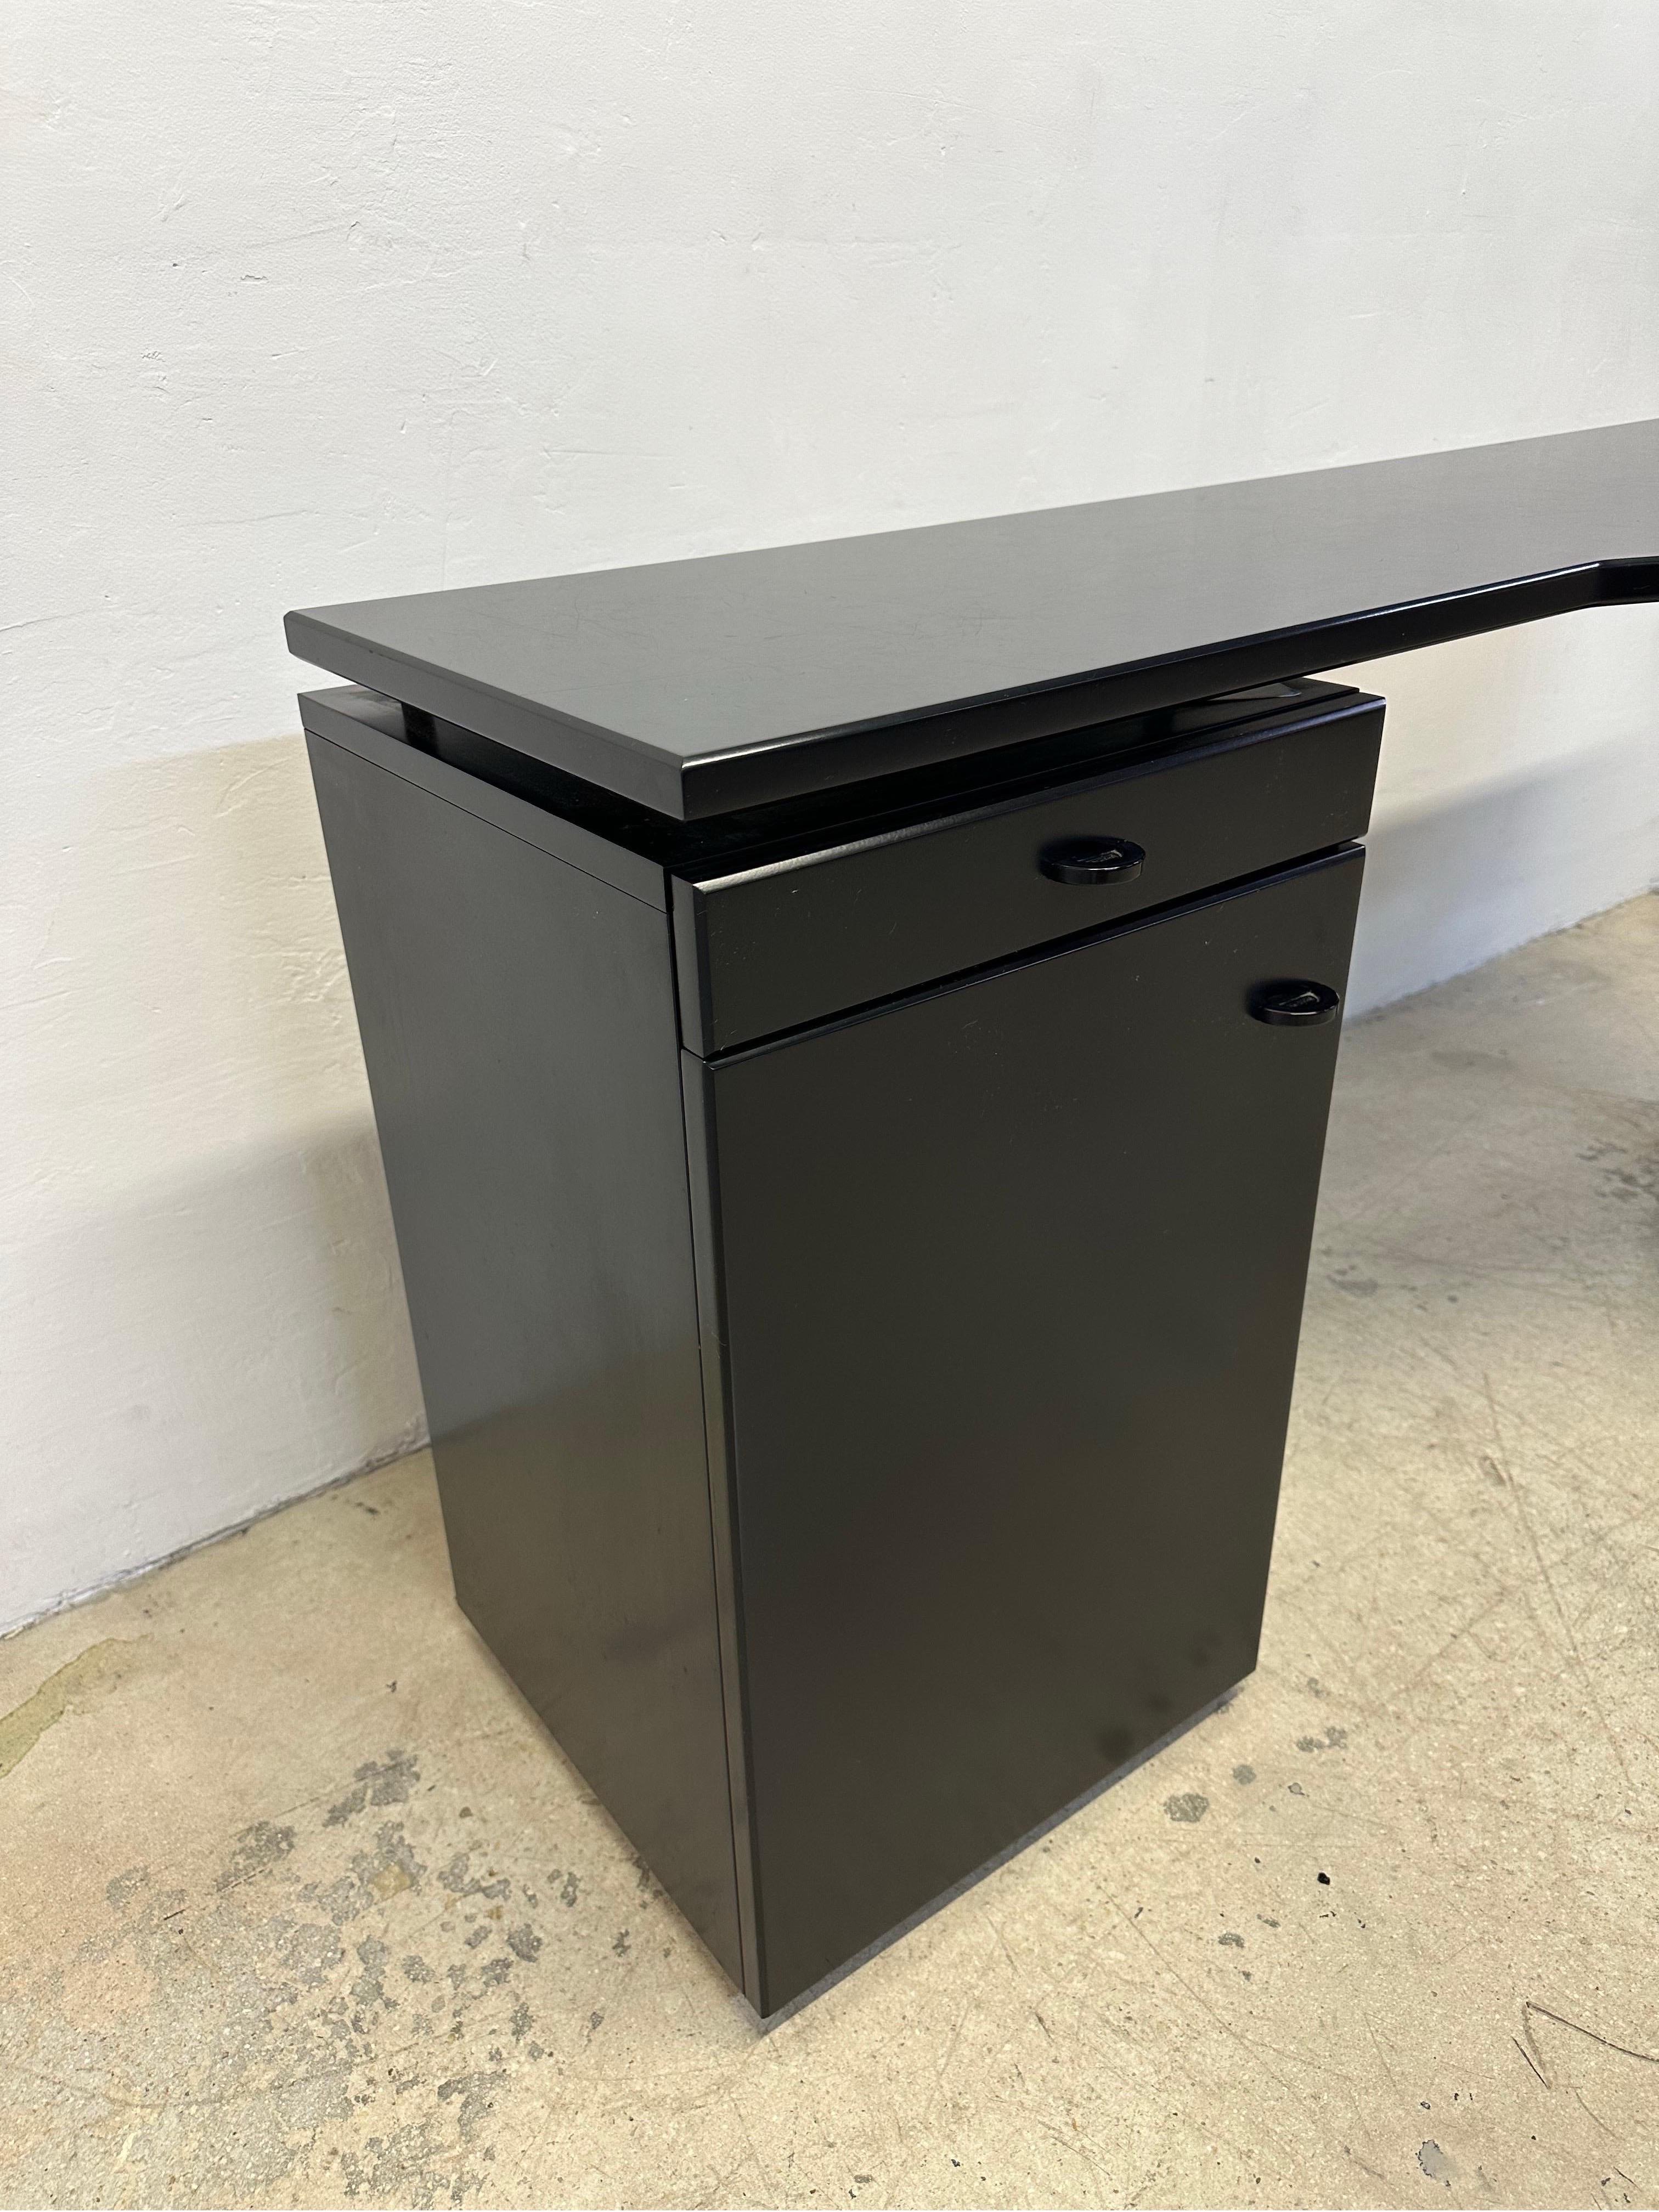 20th Century Postmodern Black Lacquered Desk by Interlubke, Germany 1980s For Sale